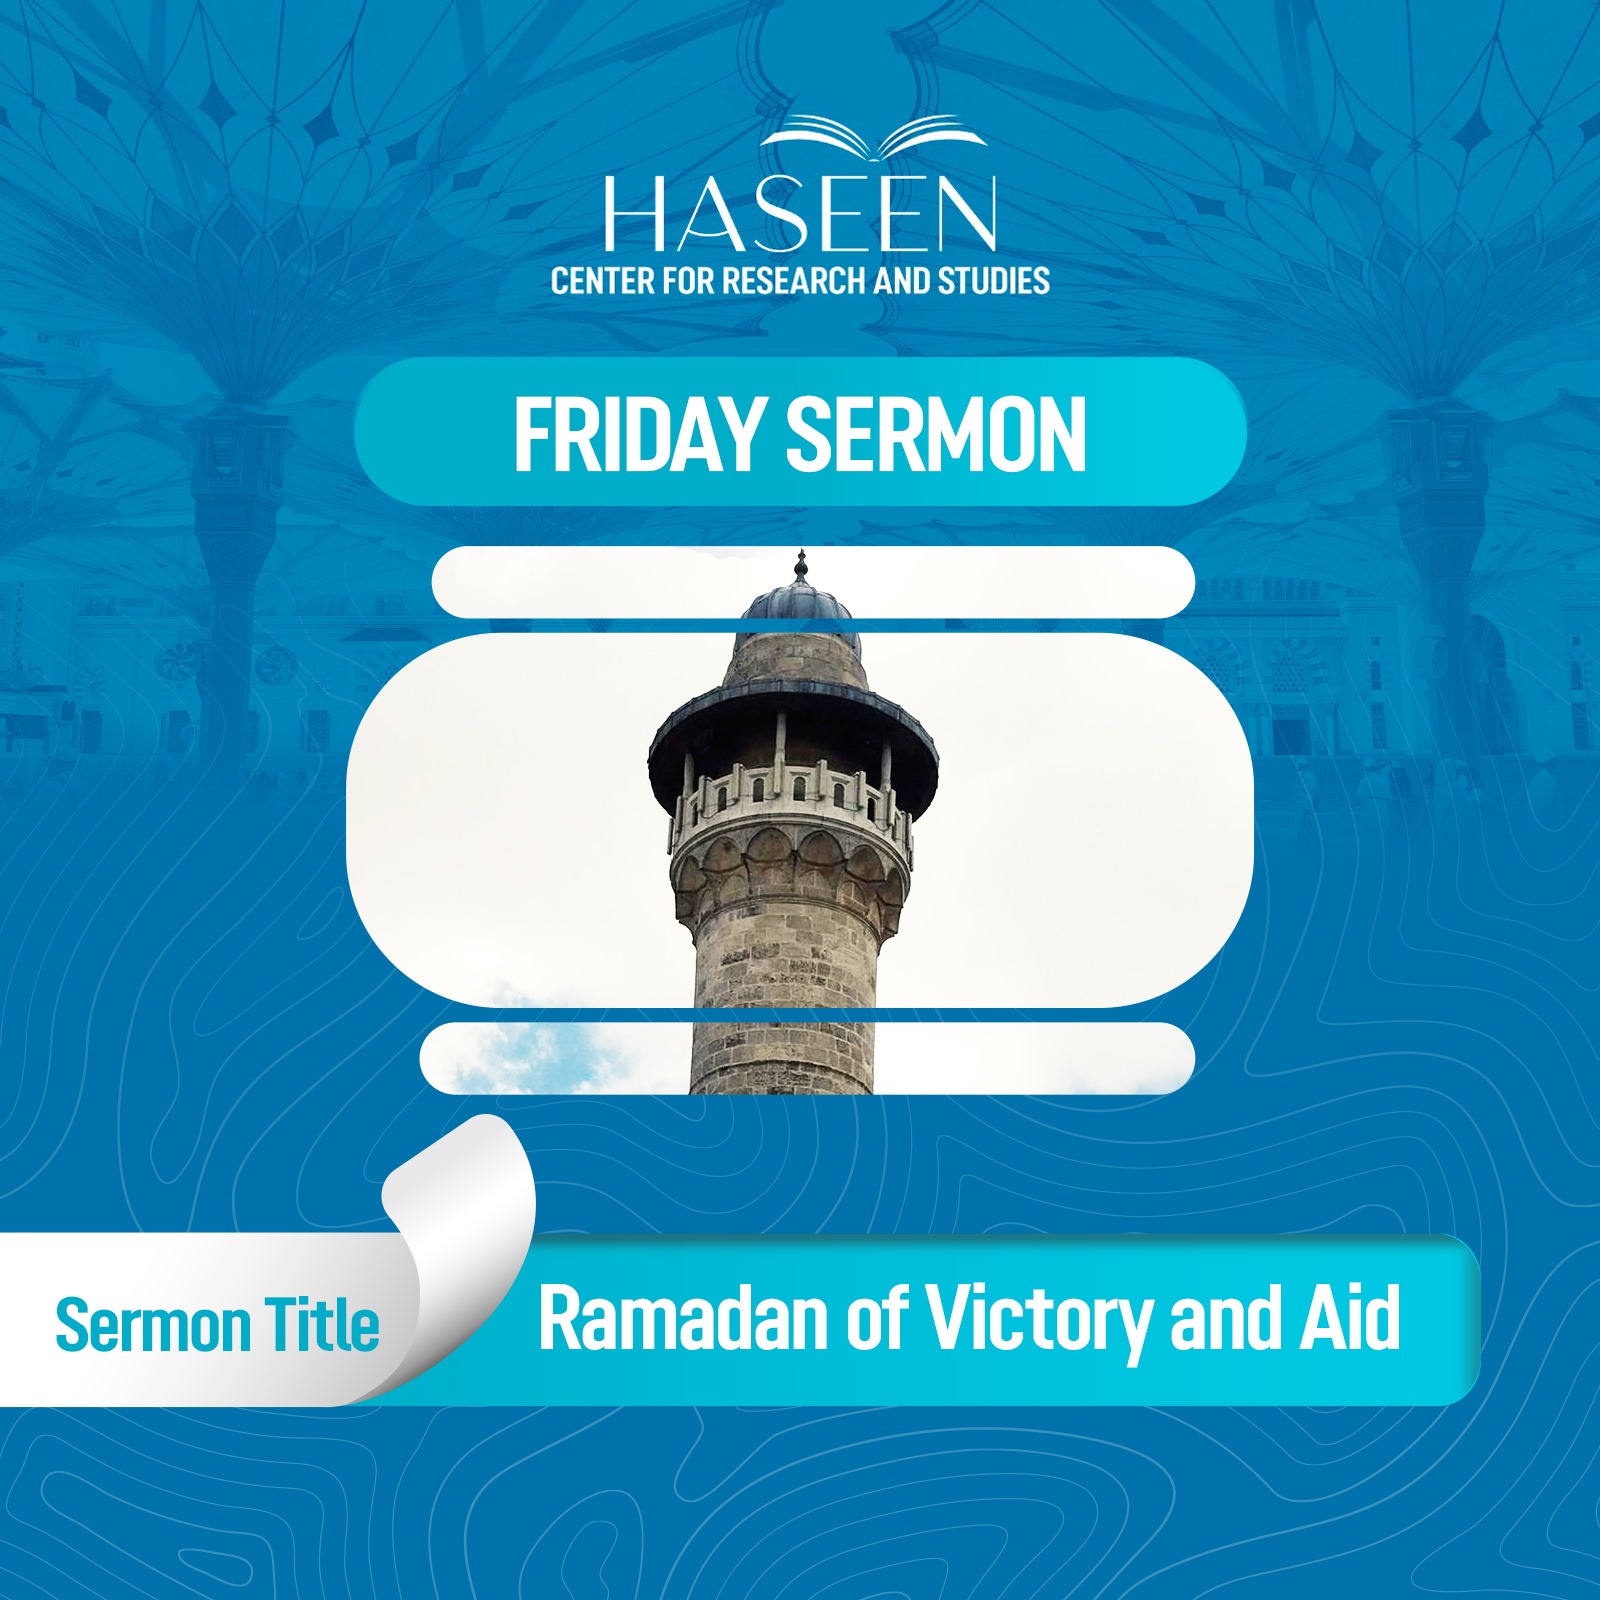 Title of the Sermon: Ramadan of Victory and Aid